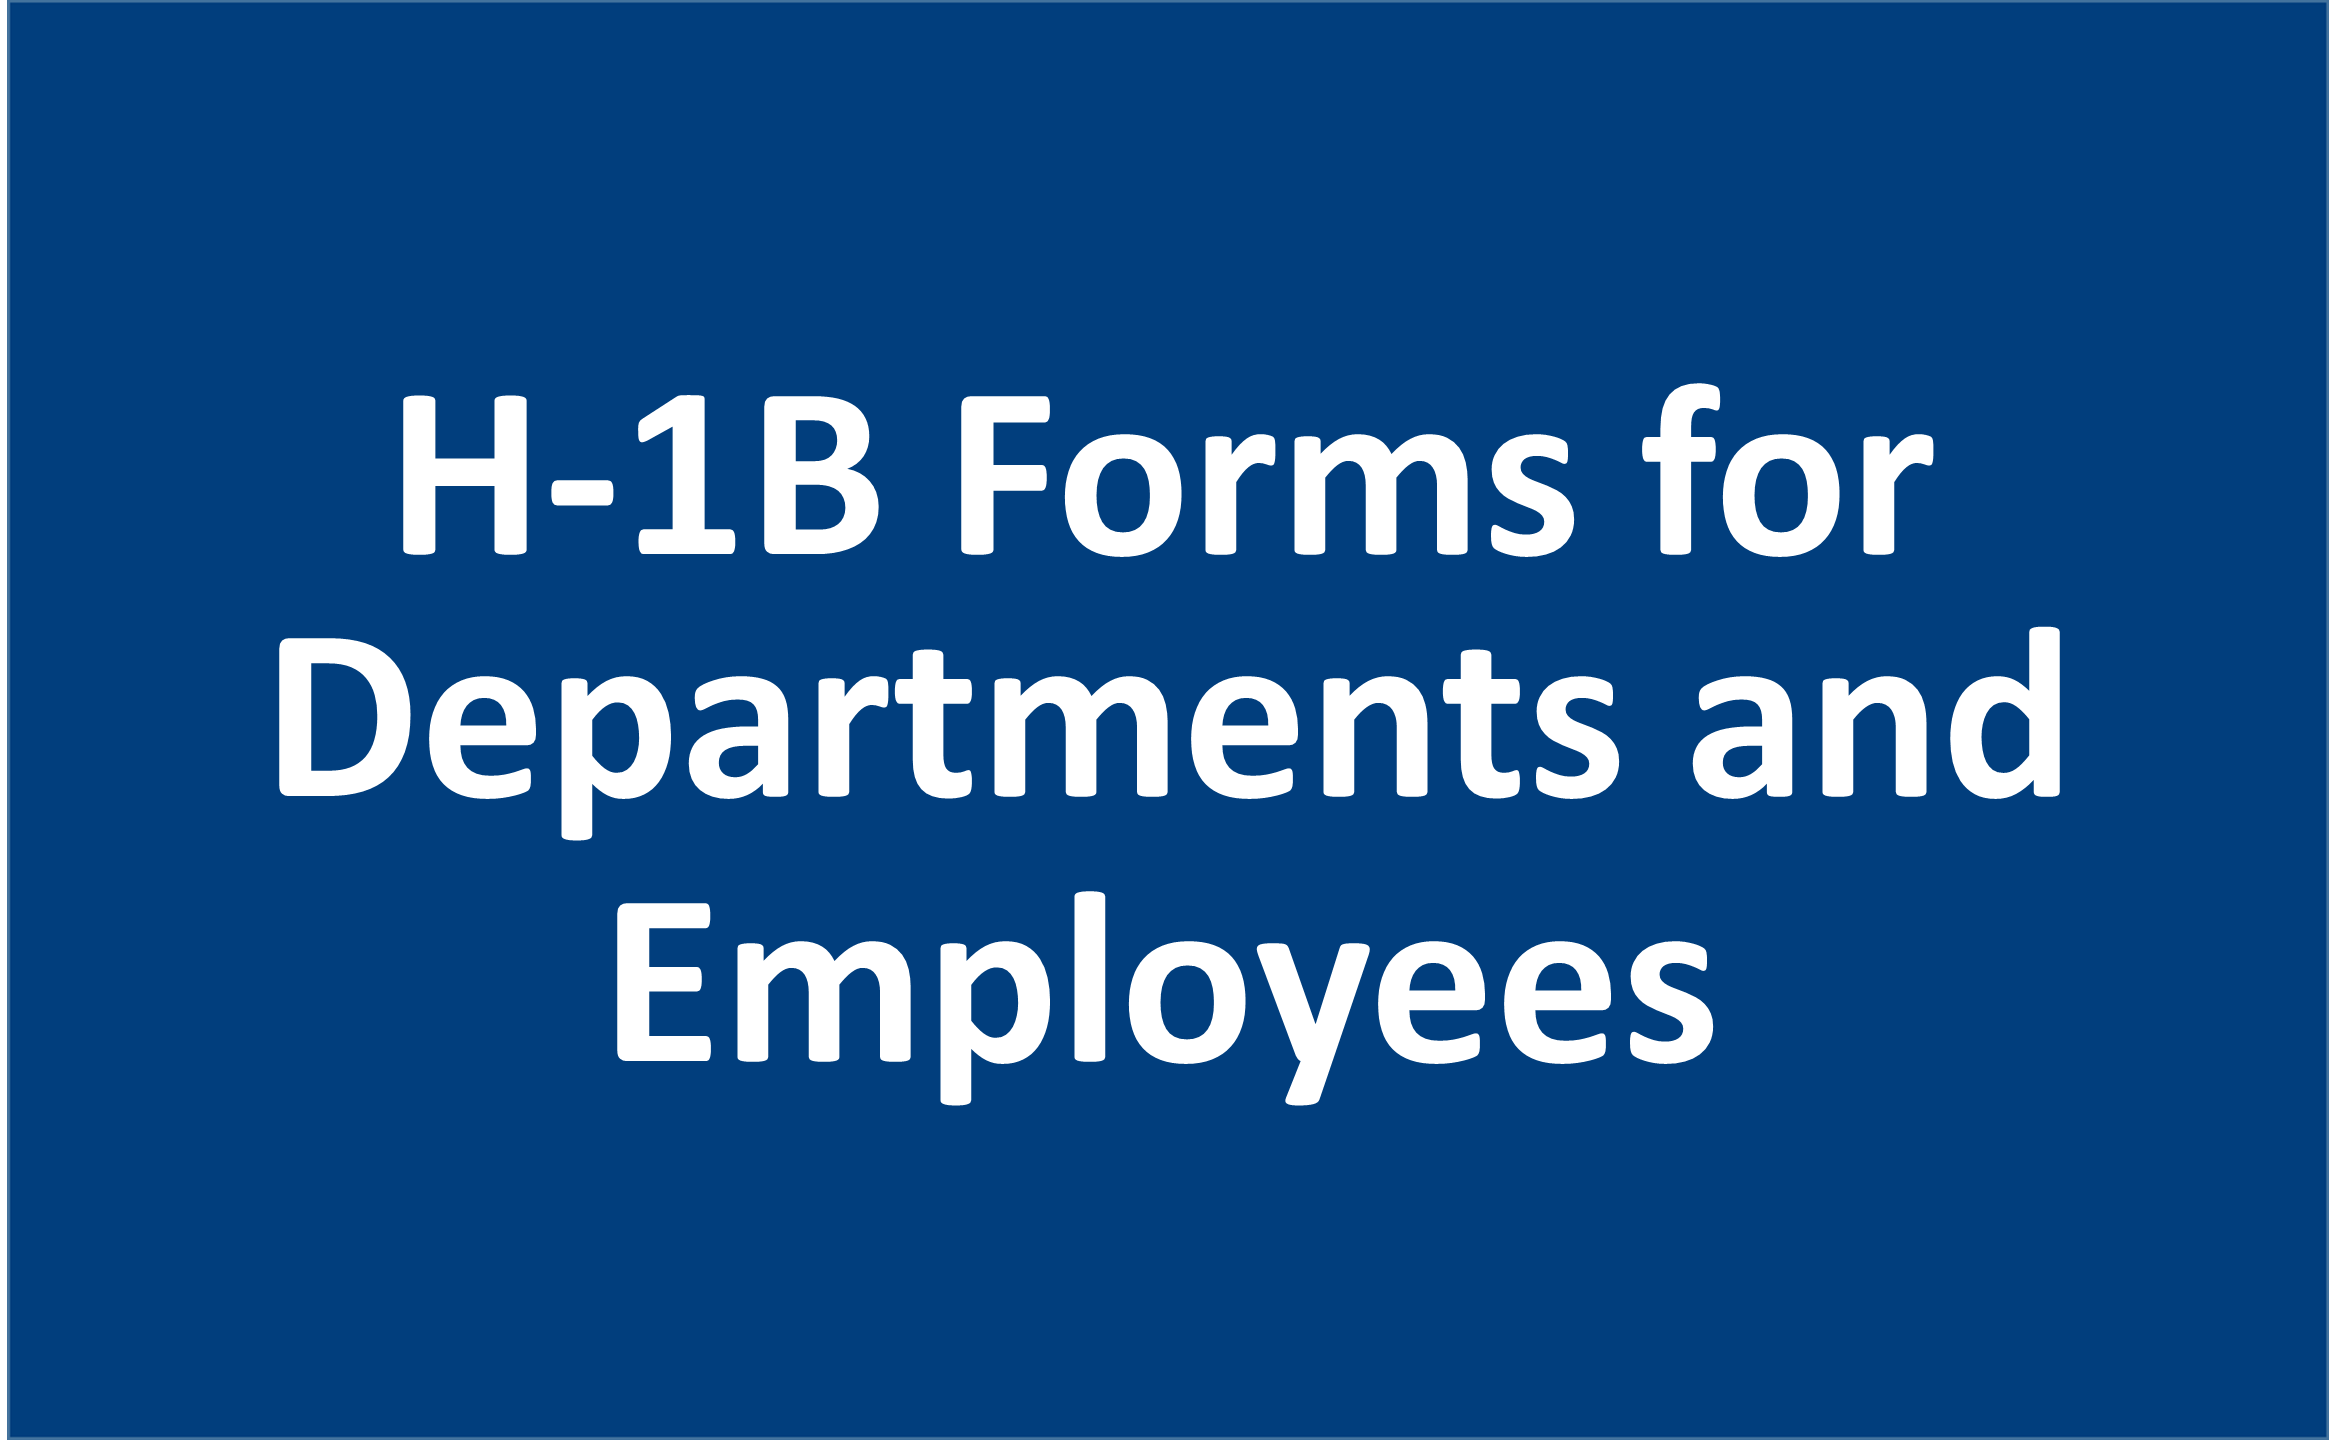 H1B Forms for Departments and Employees